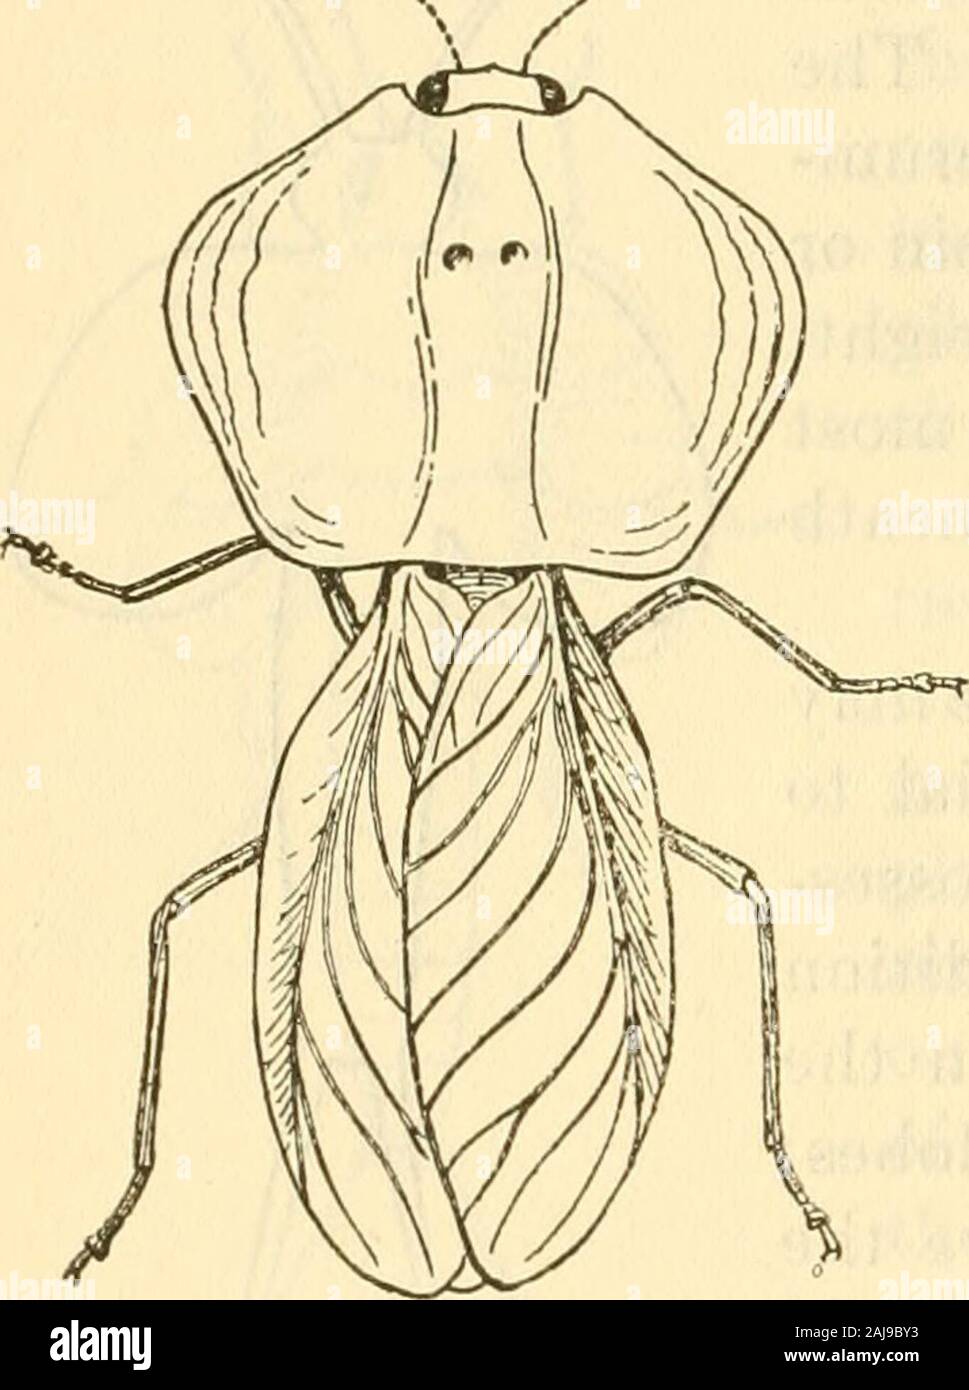 Annual report of the Board of Regents of the Smithsonian Institution . ects, orPterygota, from paranotal lobes. ThePterygota are characterized by a specialtype of structure in the plates formingthe lateral, or pleural, walls of the thoracic segments, the pleural struc-ture being essentially the same in the wingless prothorax as in the twowing-bearing segments. In the Apterygota the corresponding platesare quite different from those of the winged insects, and differ much inthe several apterygote families. We must conclude, therefore, thatthe peculiar structure of the pleural walls of the thorac Stock Photo